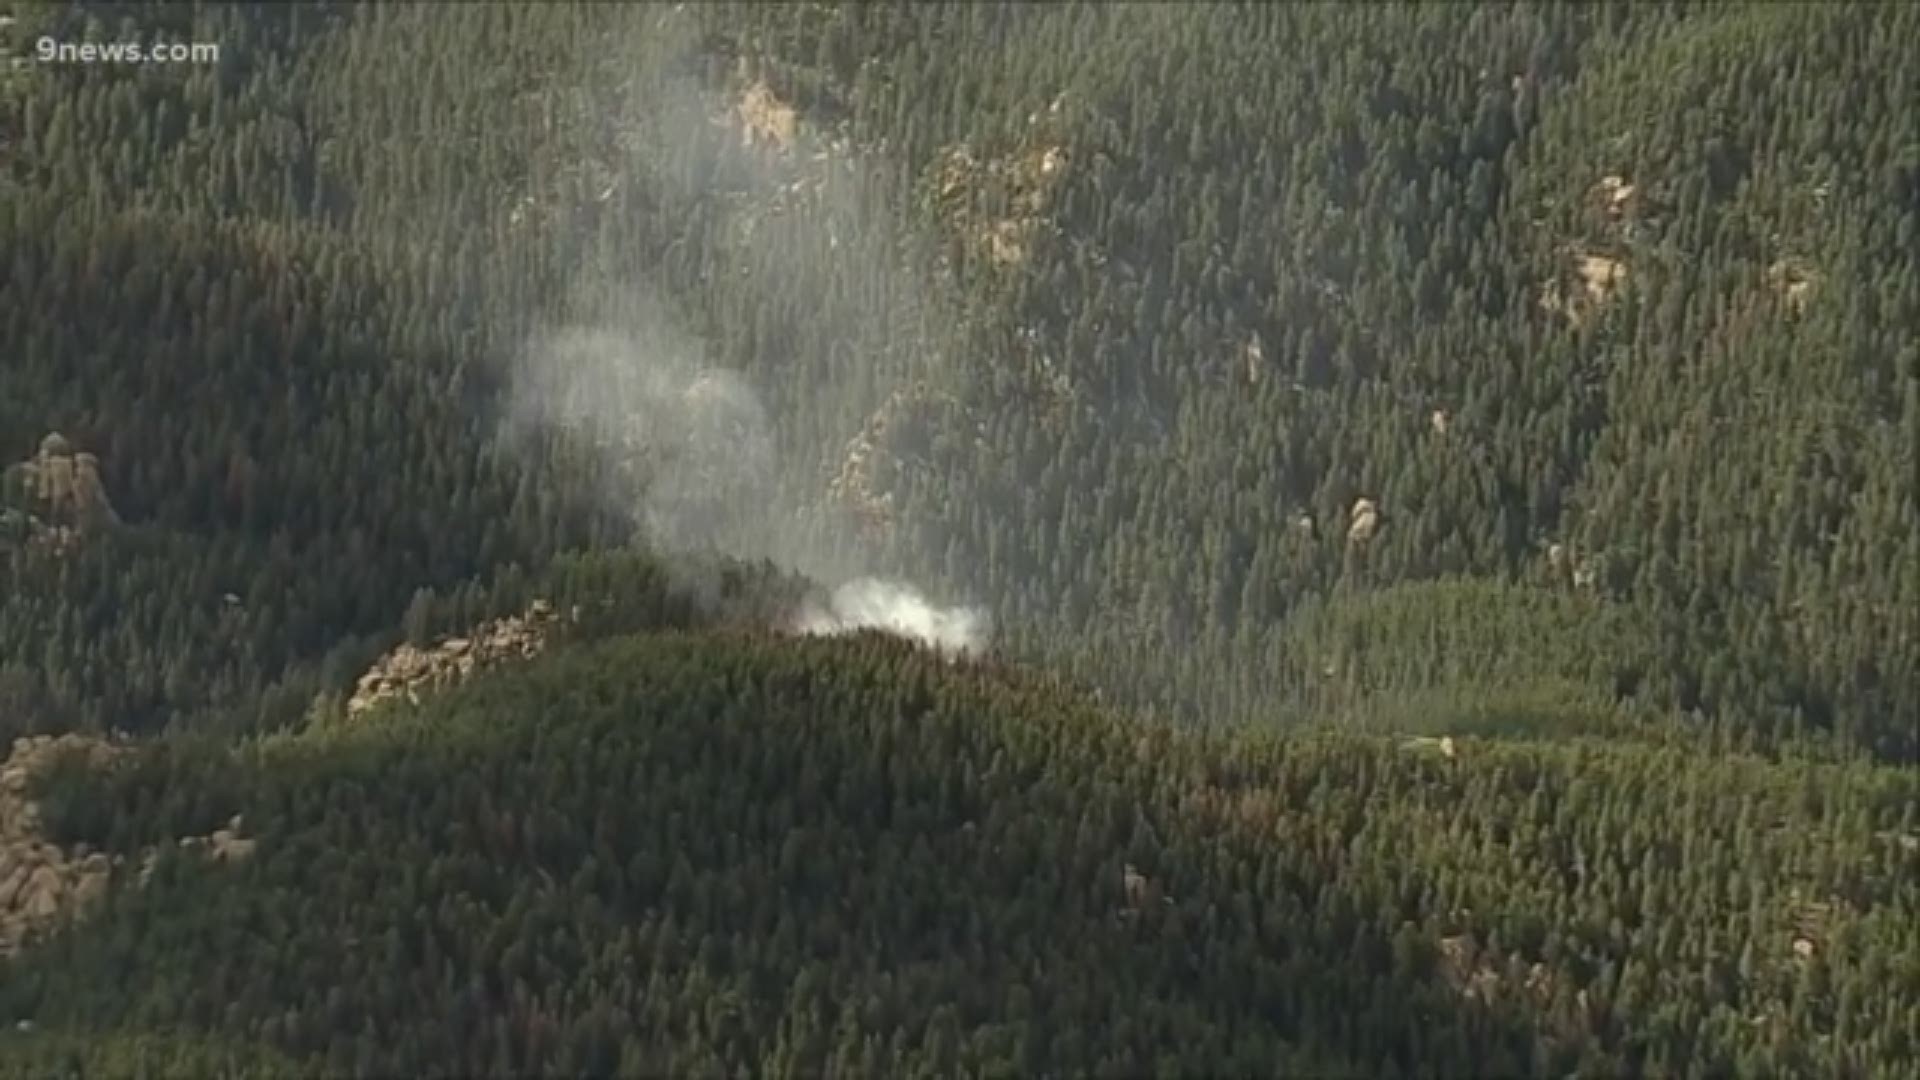 Ground and air crews are working to battle the blaze, which started burning on Thursday afternoon.